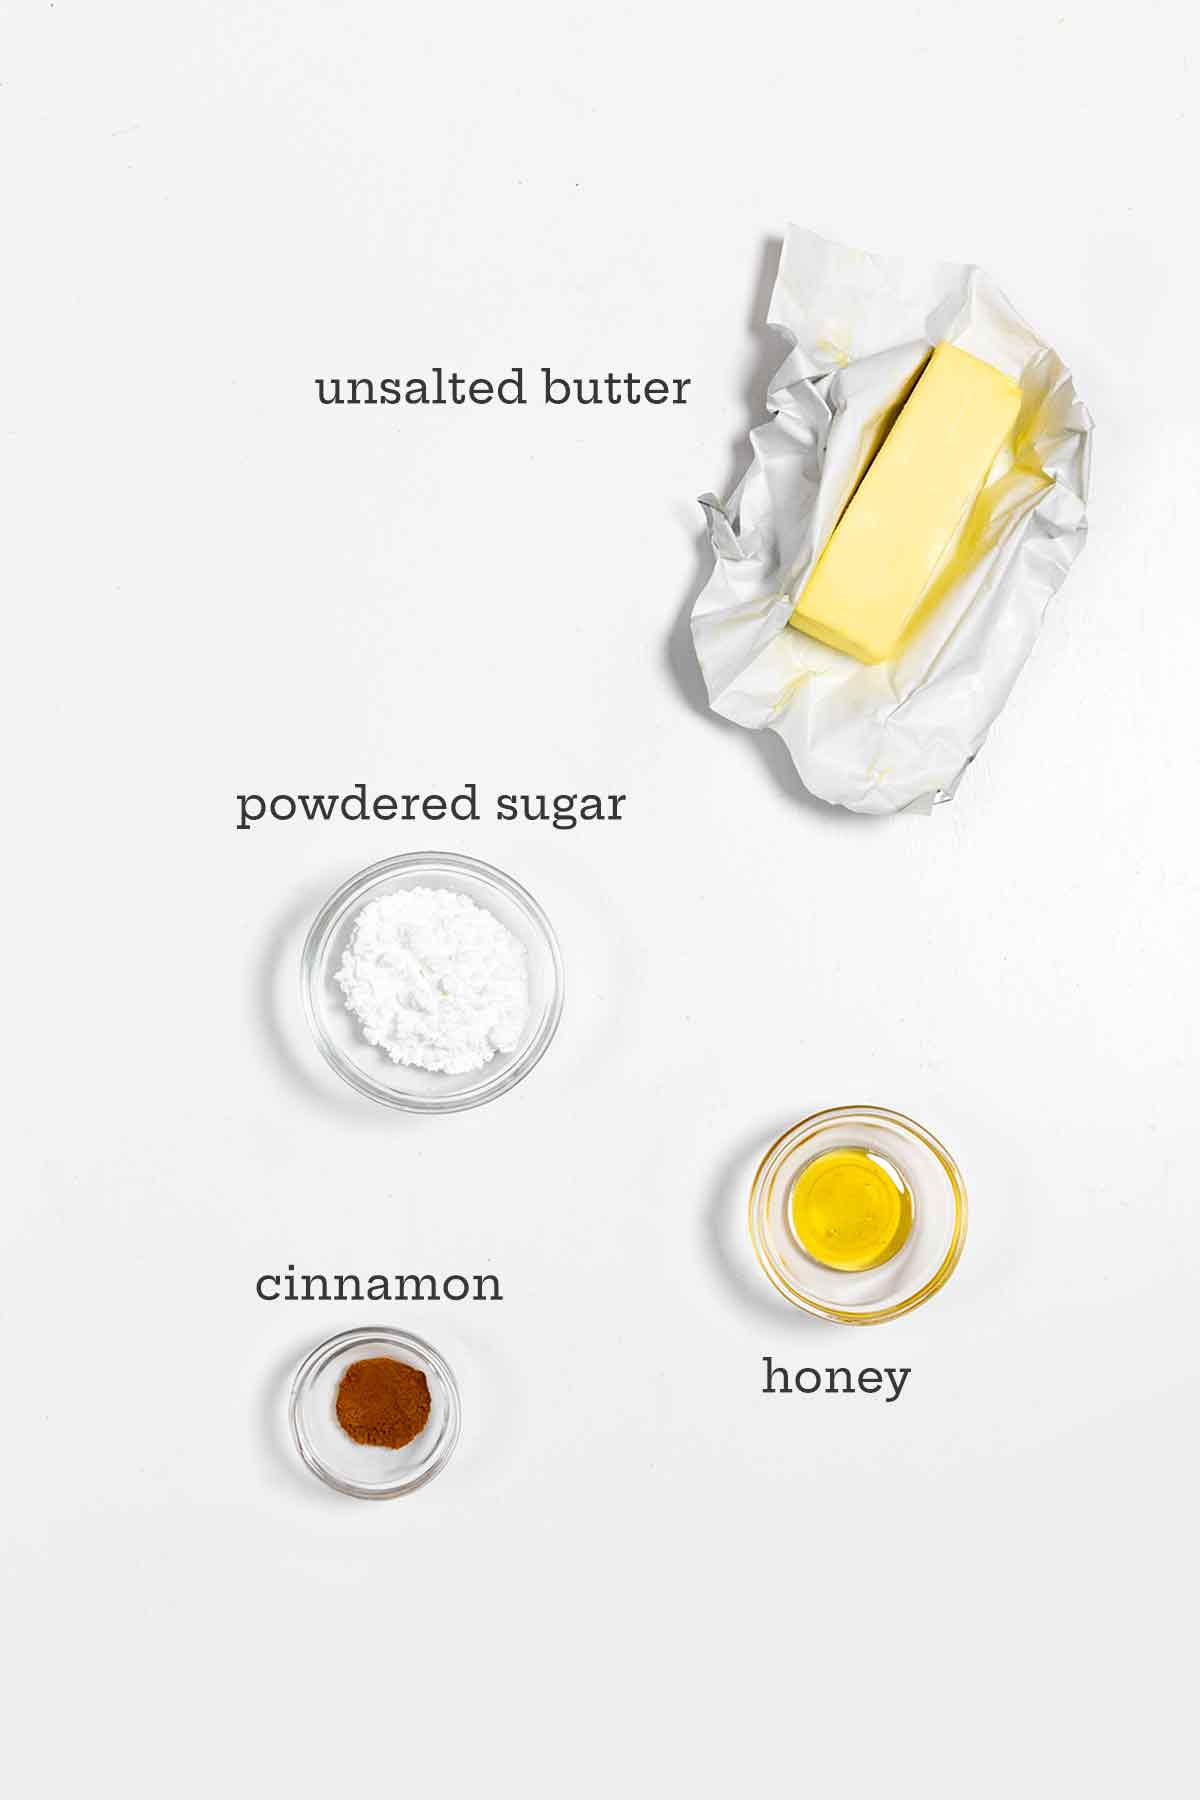 Ingredients for cinnamon butter--unsalted butter, powdered sugar, cinnamon, and honey.